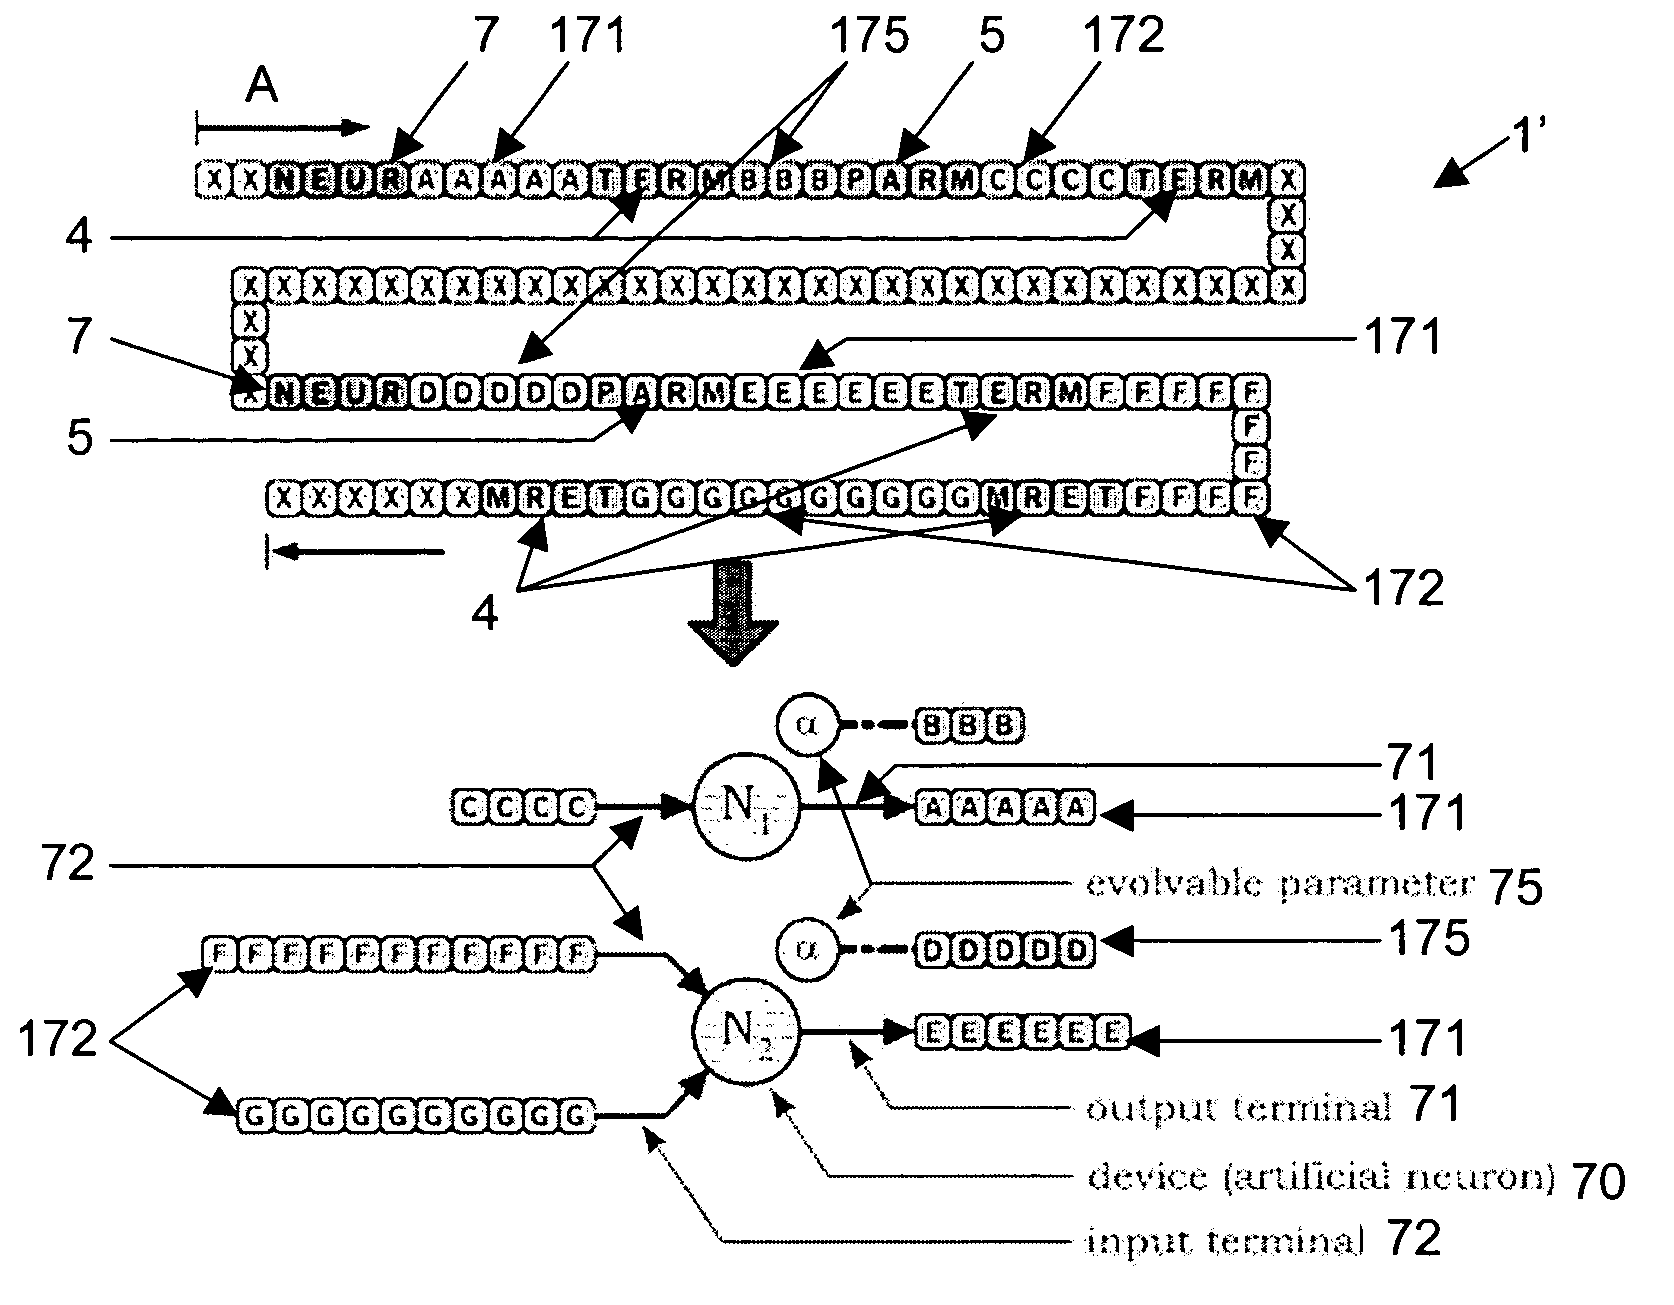 Method and device for evolving a network using a genetic representation